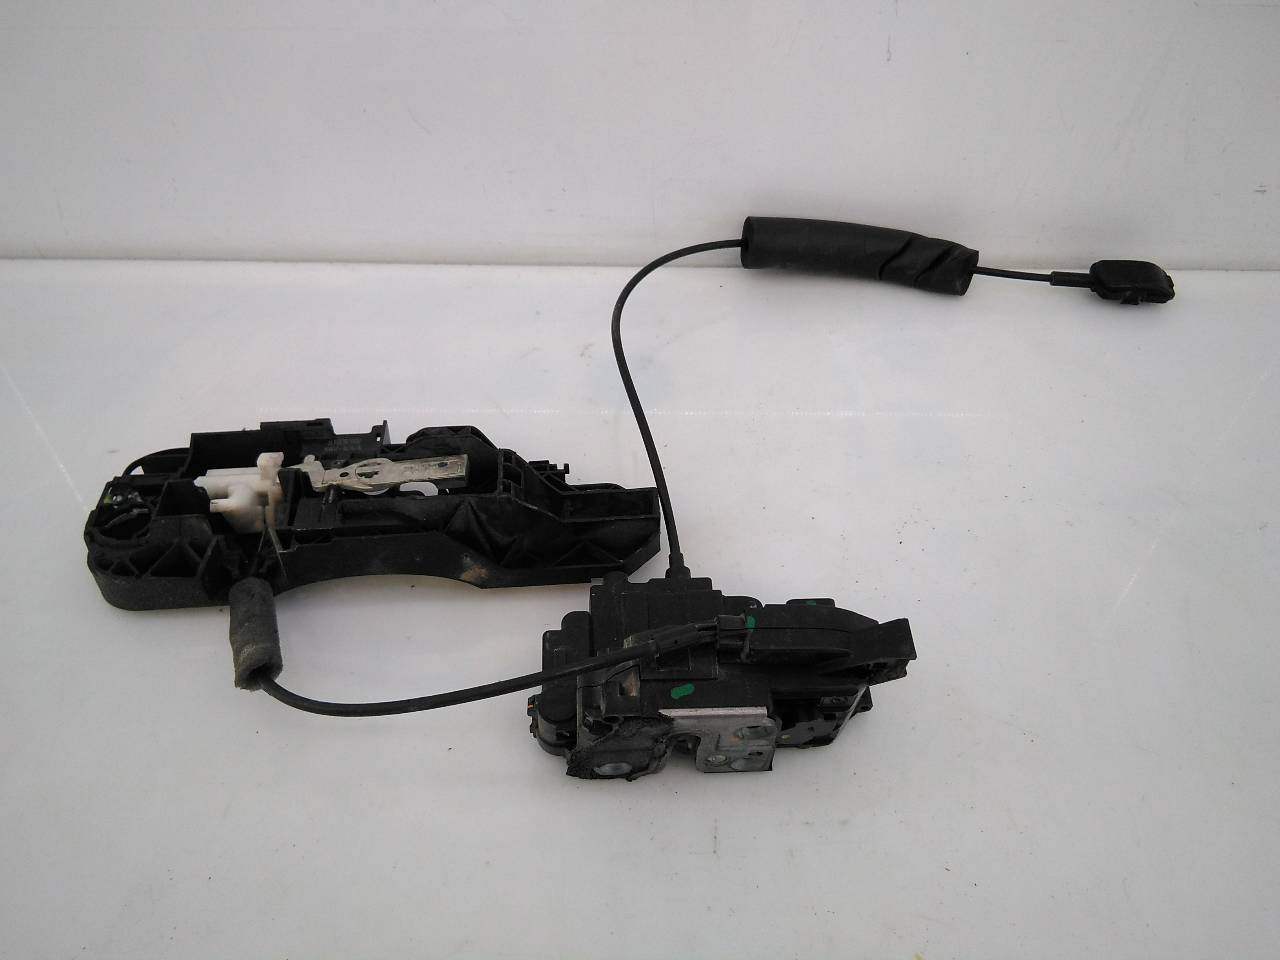 RENAULT Scenic 3 generation (2009-2015) Front Right Door Lock 805020006R, E1-A1-12-1 18493605